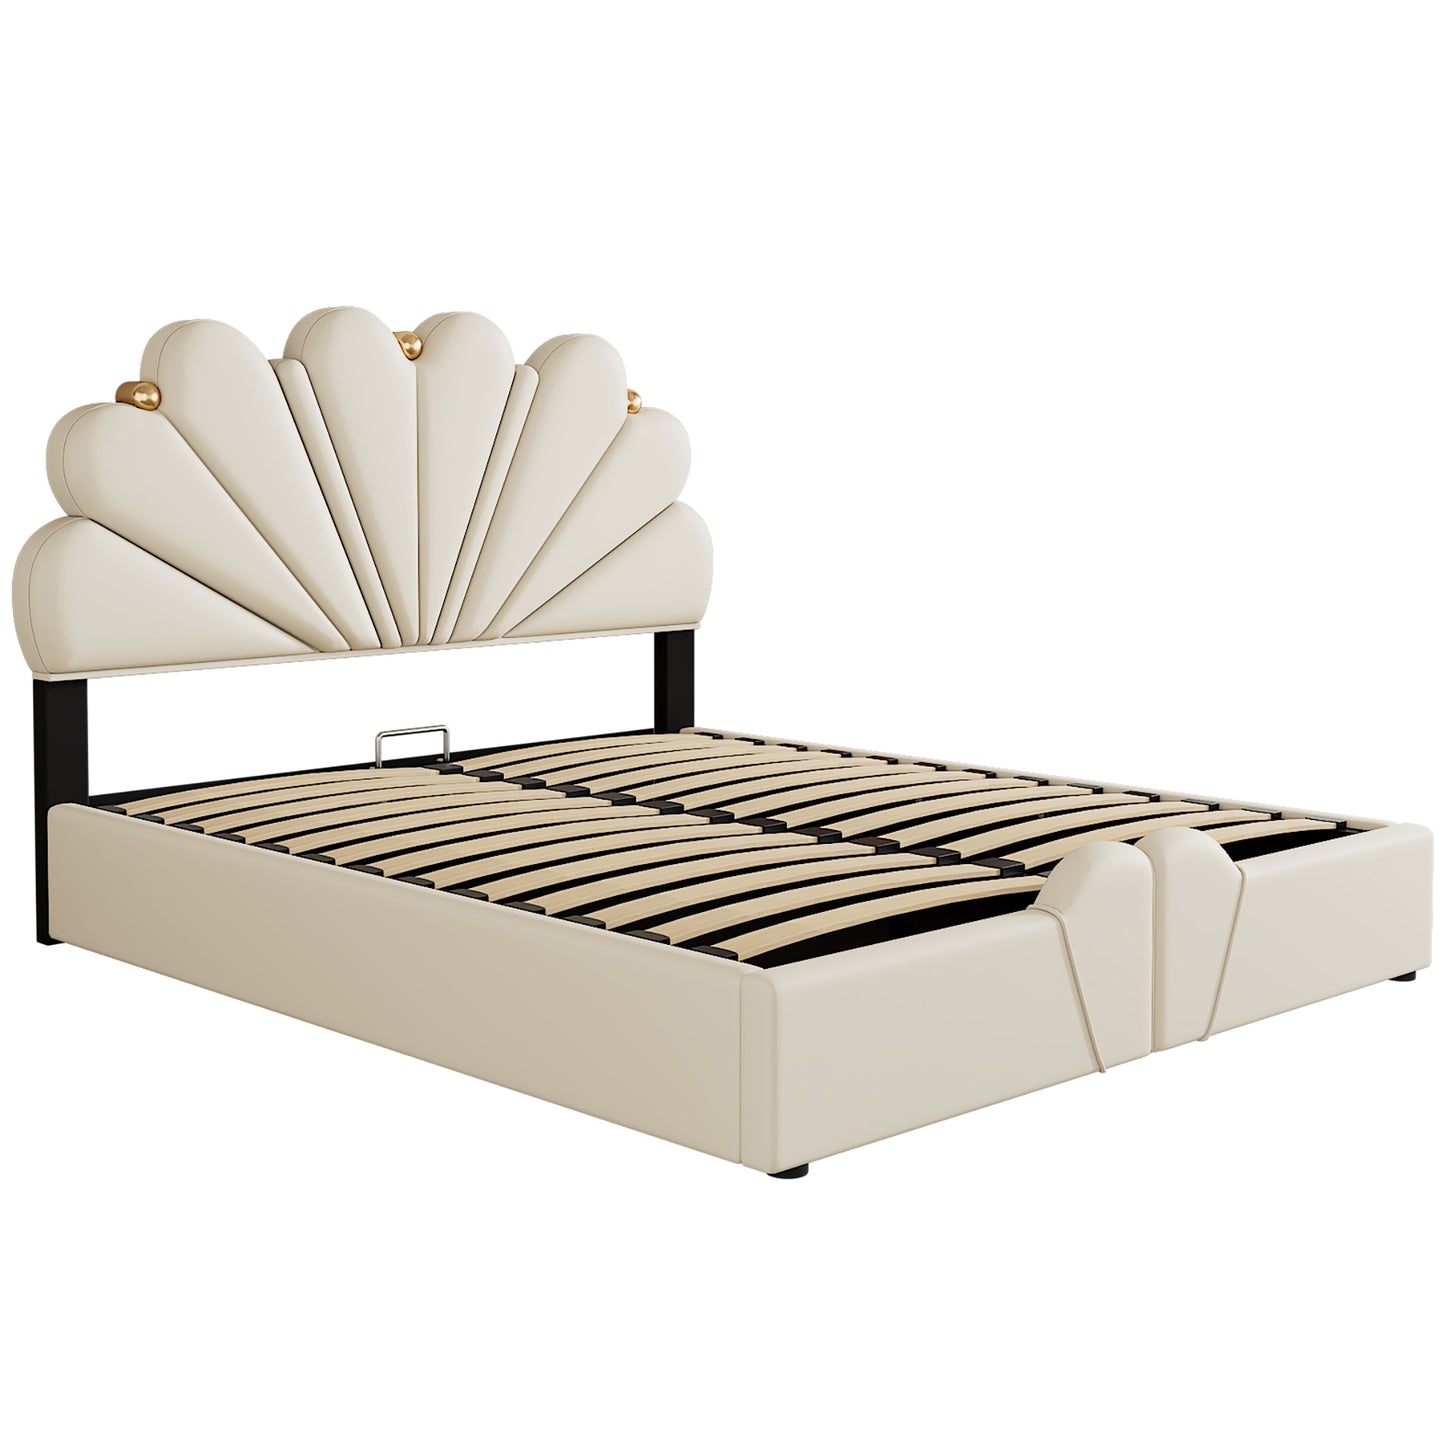 Queen Size Upholstered  Petal Shaped Platform Bed  with Hydraulic Storage System, PU Storage Bed, Decorated with metal balls, Beige